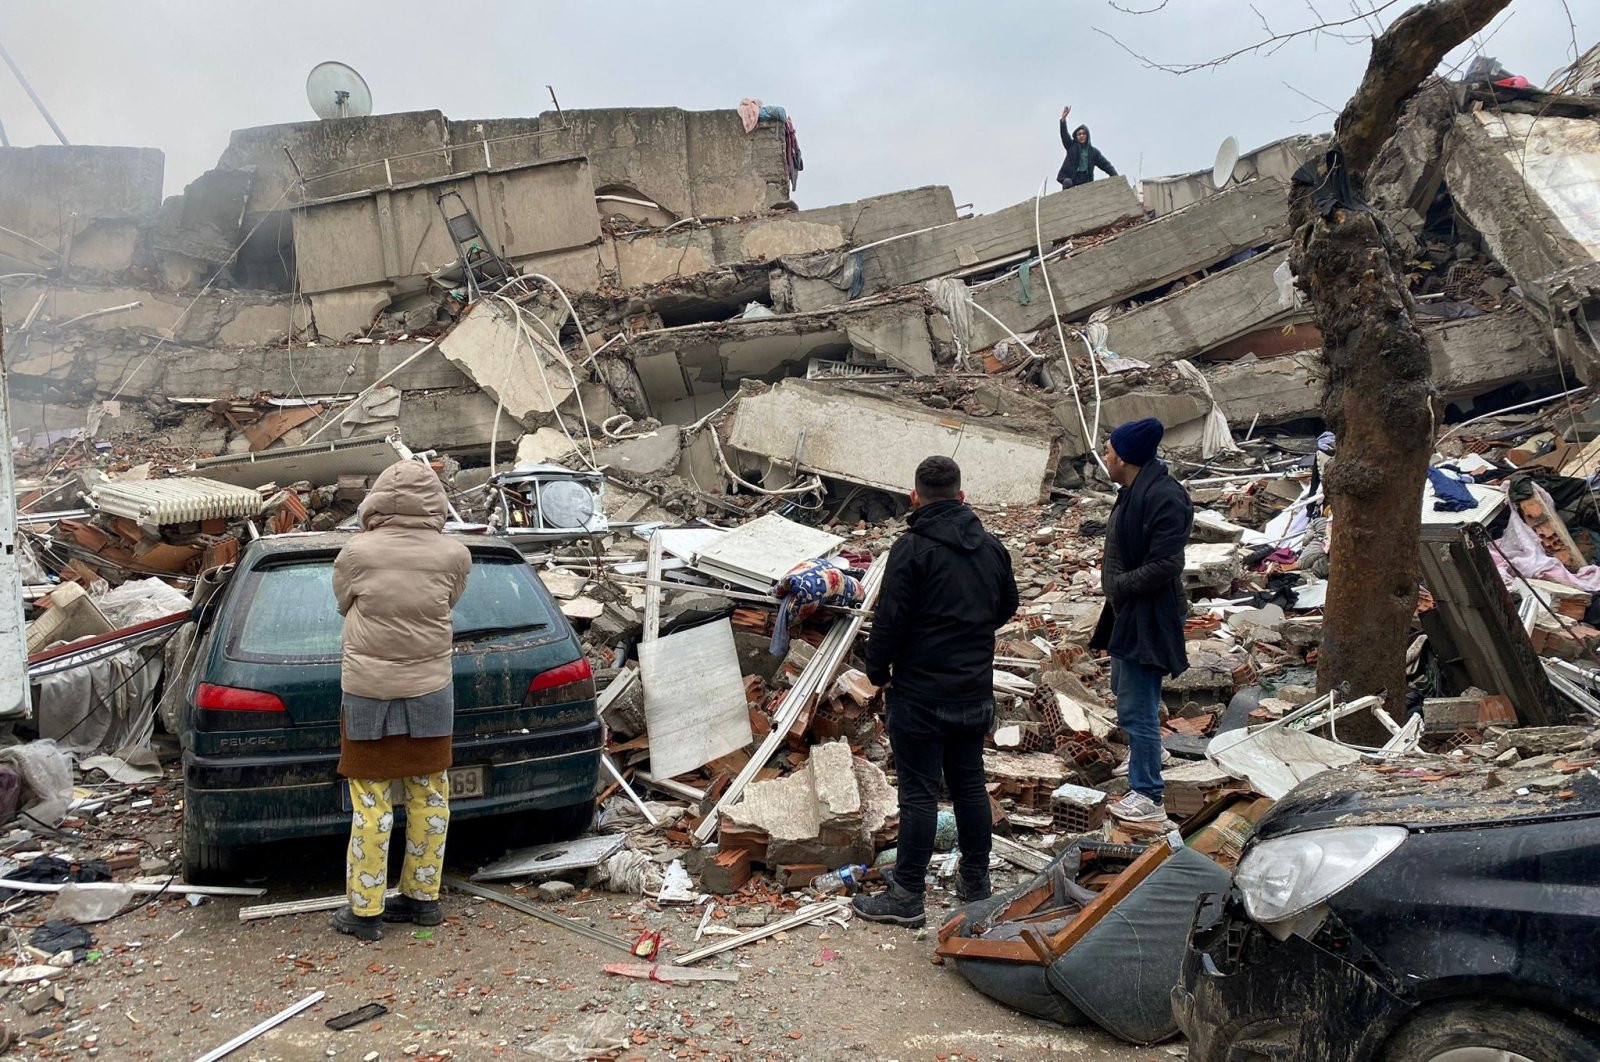 People stand in front of a collapsed building after an earthquake in Kahramanmaraş, Türkiye Feb. 6, 2023. (Reuters Photo)